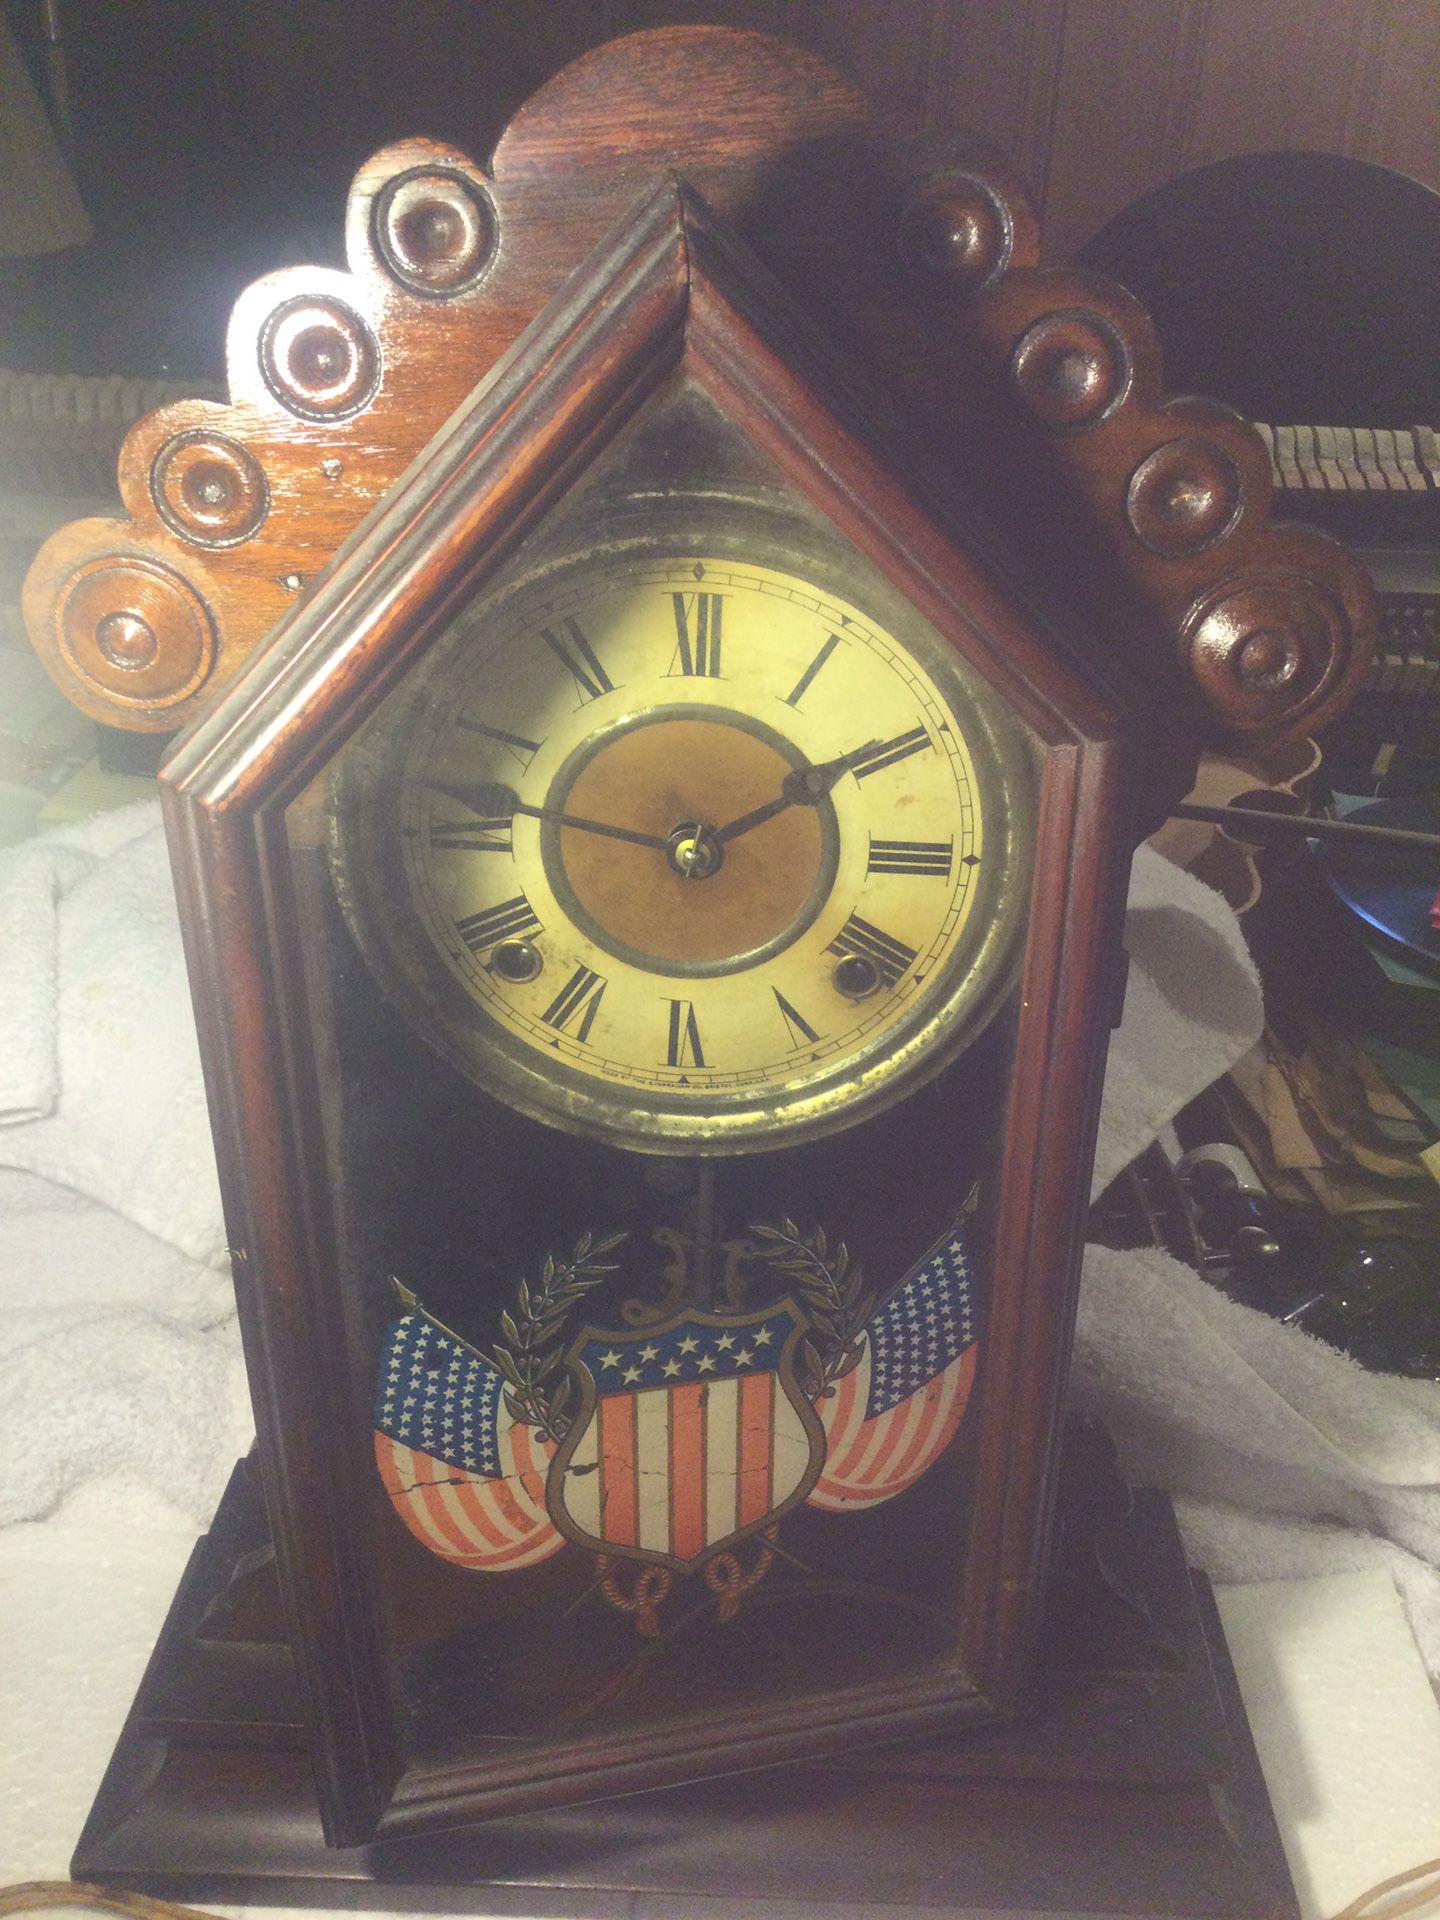 Antique Mantel Clock With Reverse Painting Of Eagle Flag